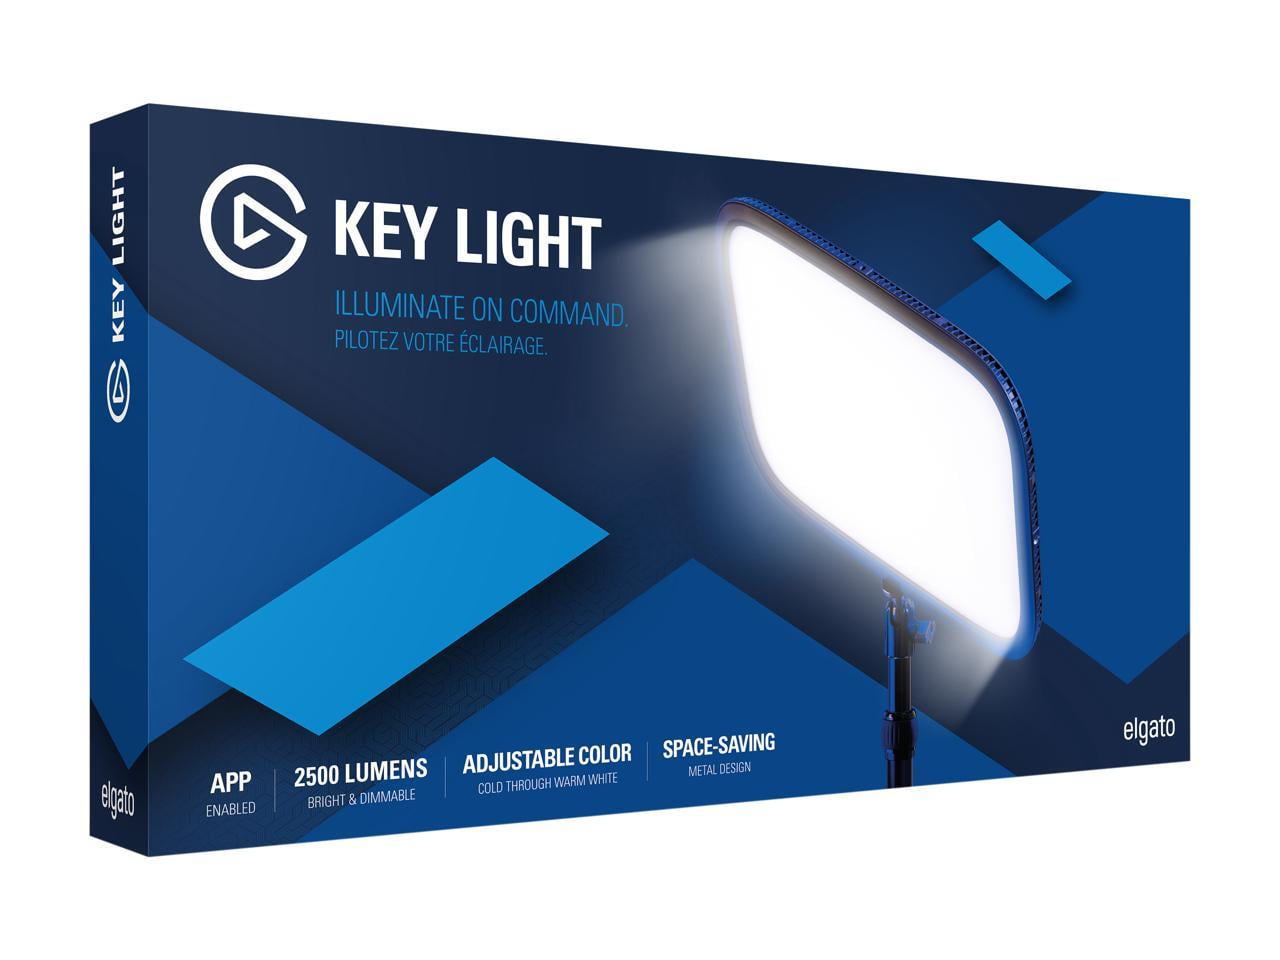 Elgato Key Light - Professional Studio LED Panel, App-controlled, 2800  Lumens, Color Temperature Adjustable, Desk Mount Included, for PC and Mac 